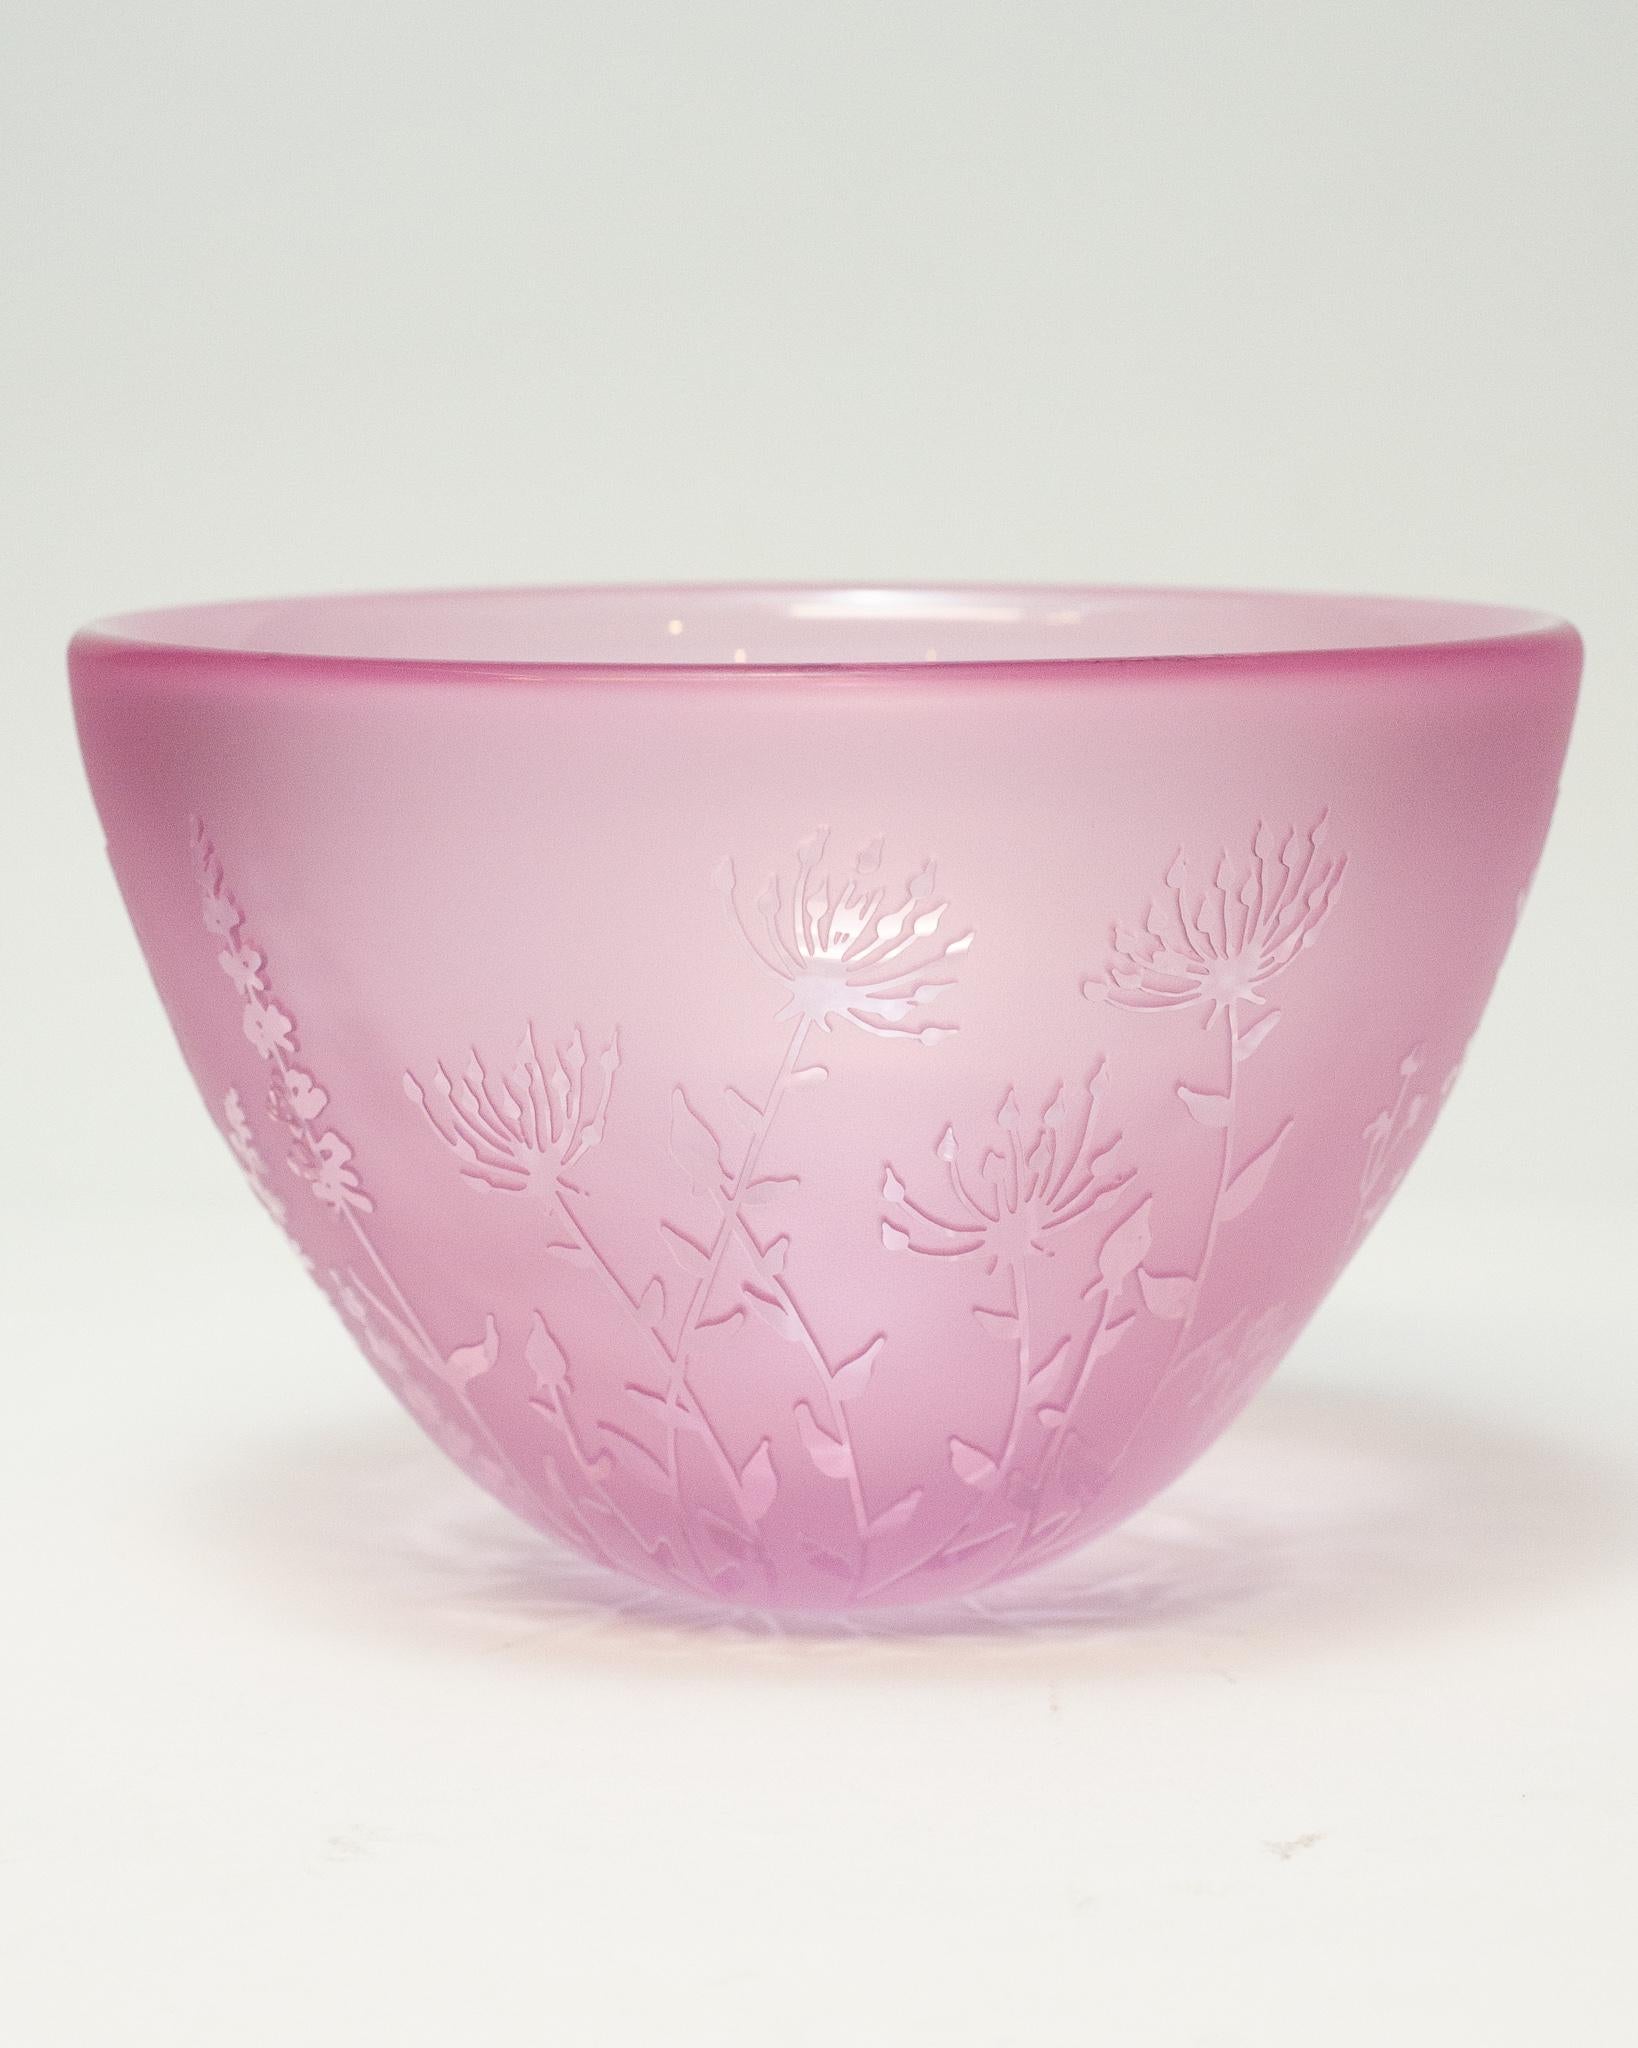 A stunning contemporary pink blown glass bowl with sandblasted surface and raised cut glass botanical motifs by a Canadian artist.